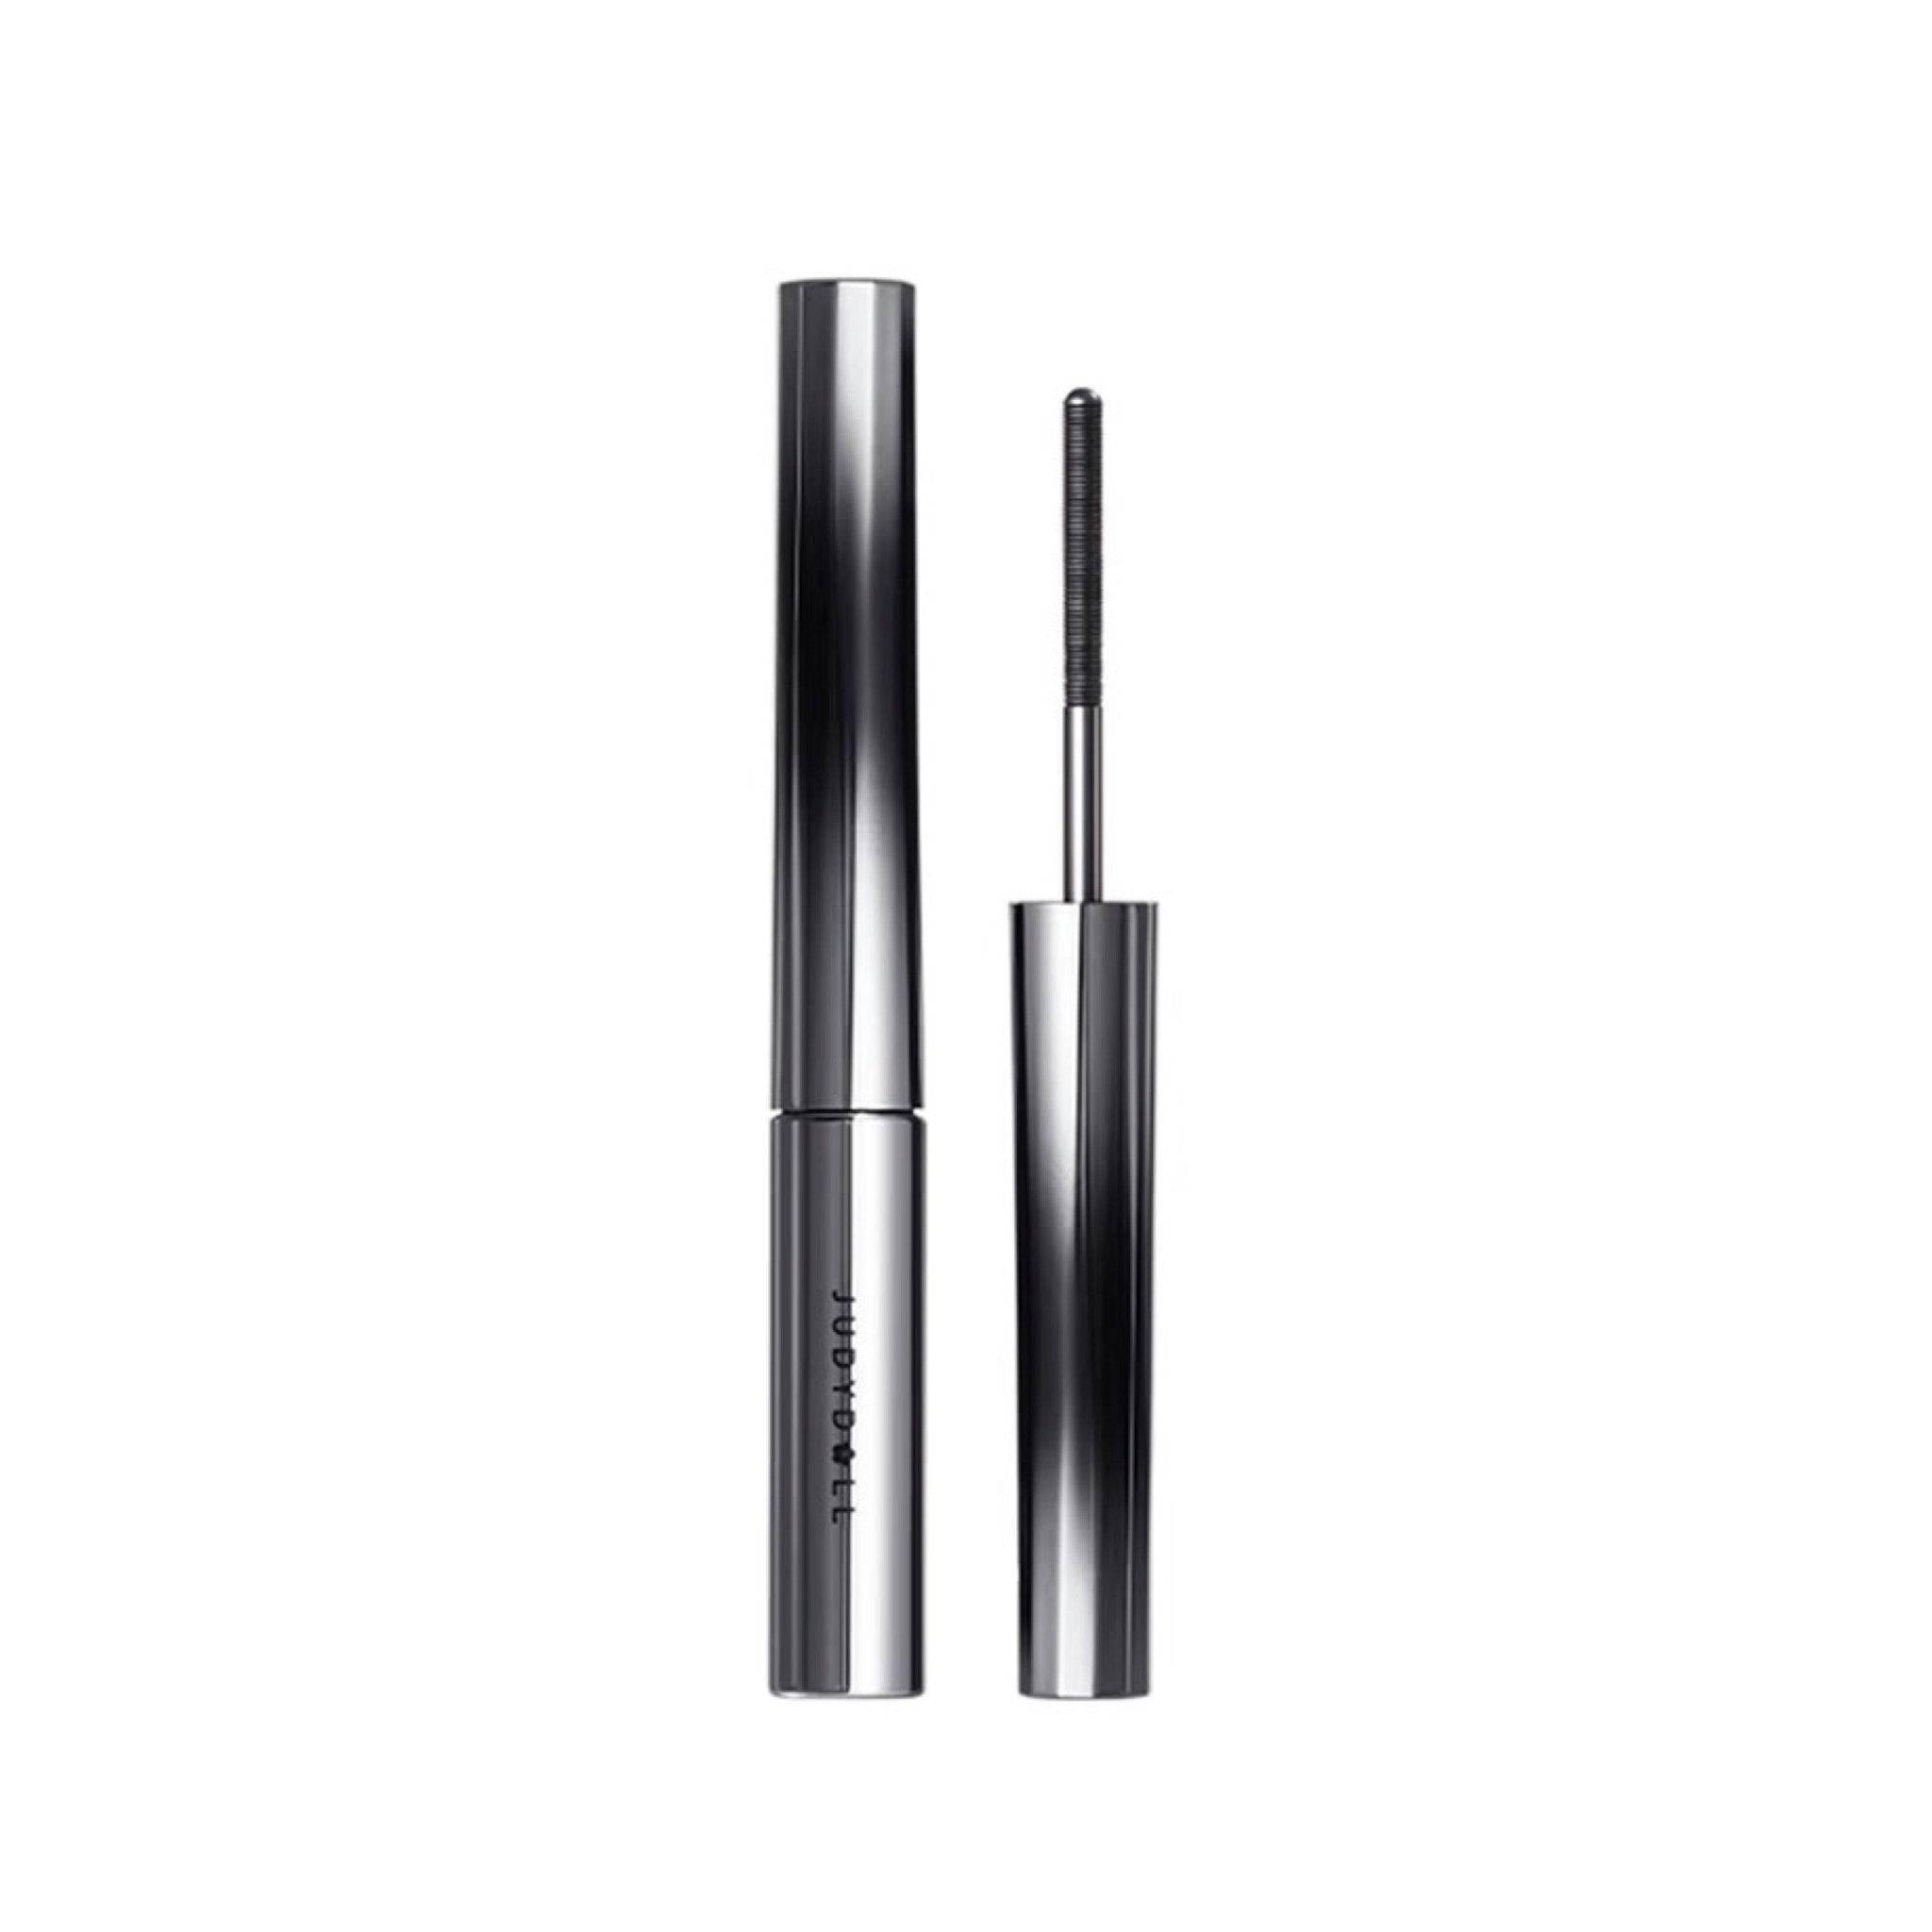  Judy Doll Mascara, Judy Doll 3D Strong Curling Iron Mascara, Judy  Doll Metal Mascara, Bristleless Mascara, Waterproof, Smudge-Proof, Long  Lasting, No Flaking, No Clumping : Beauty & Personal Care